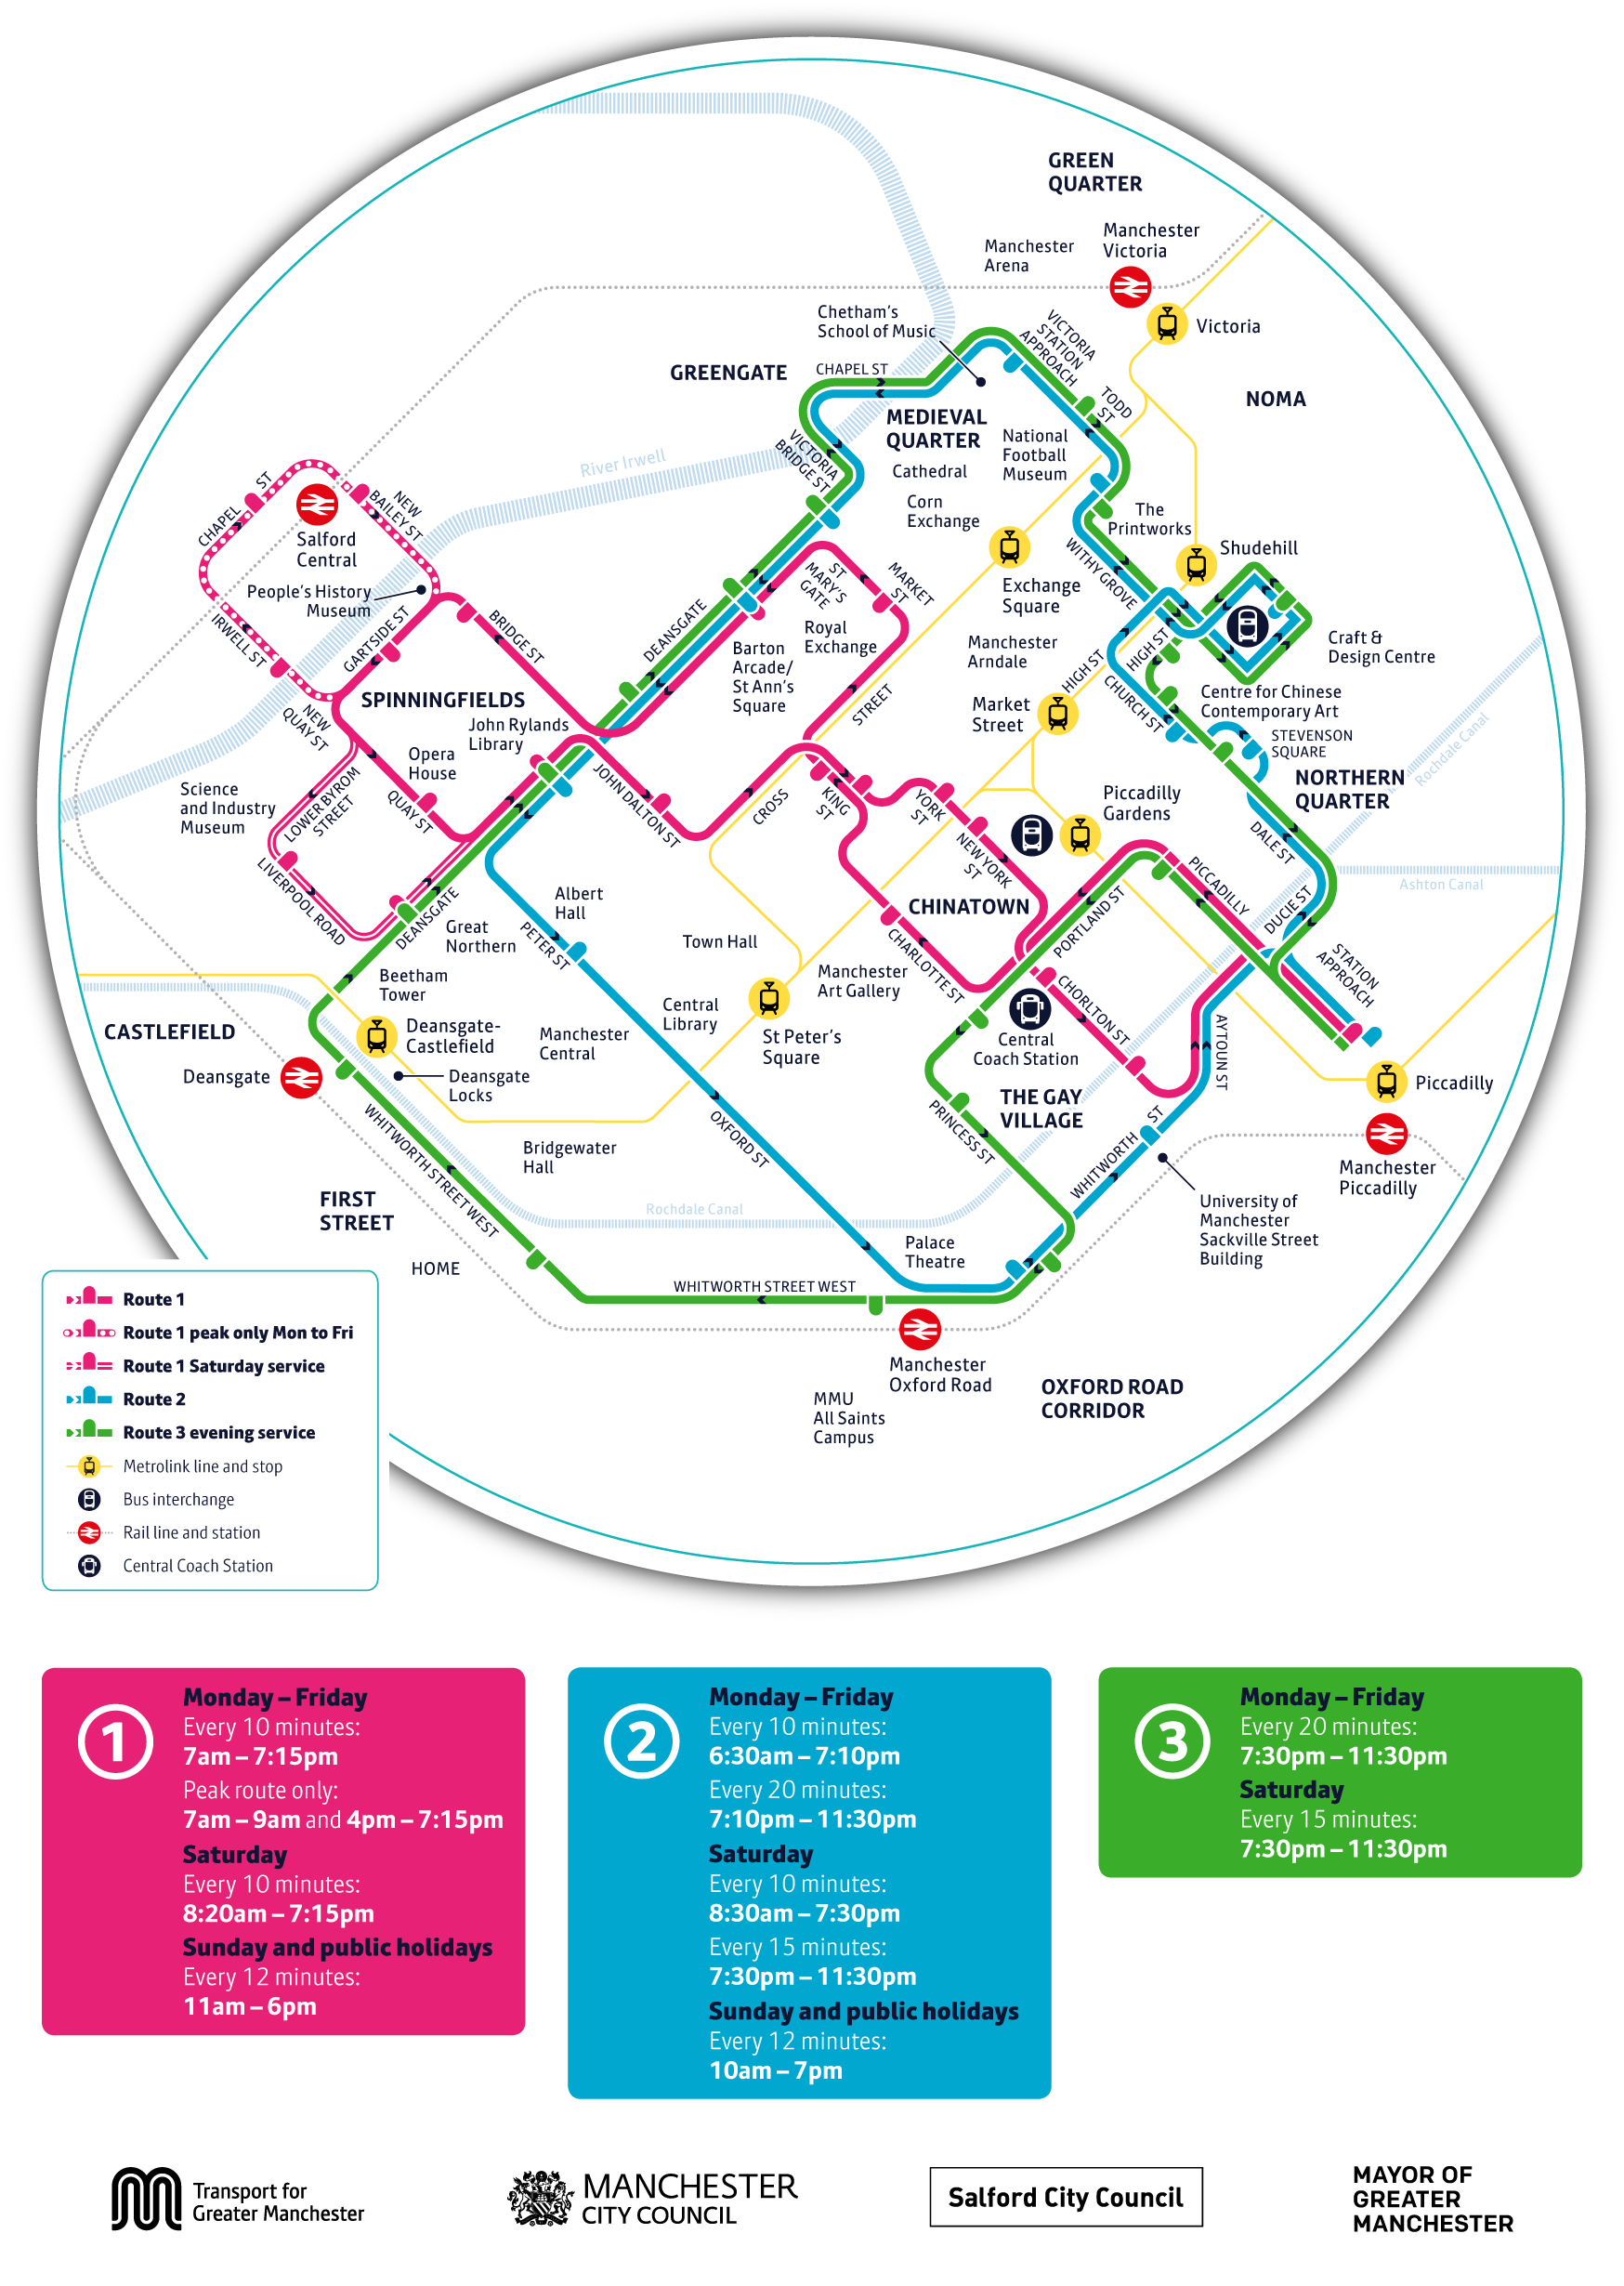 free bus travel greater manchester